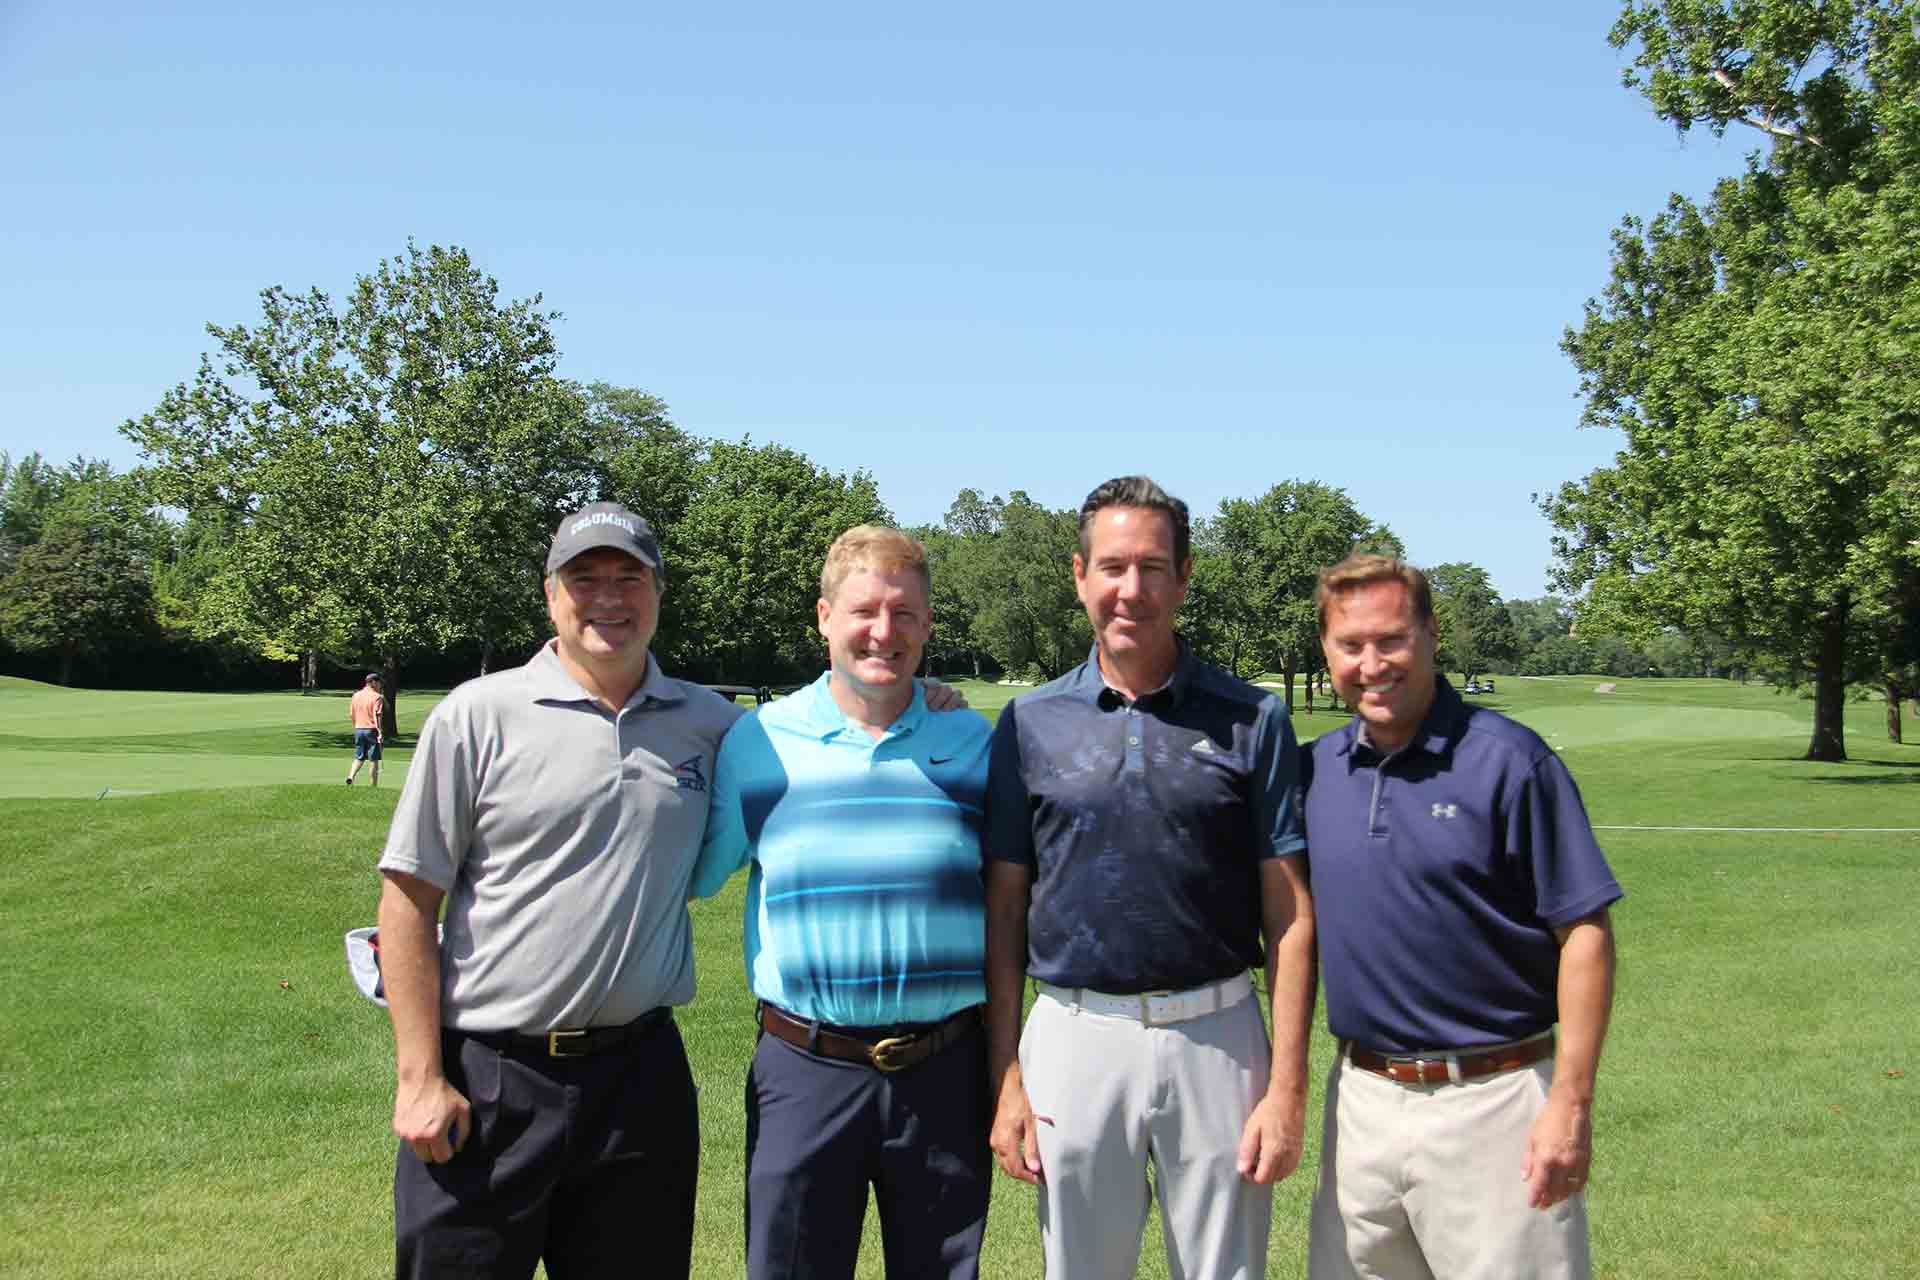 marist-law-association-golf-outing-four-golfers-smiling-together